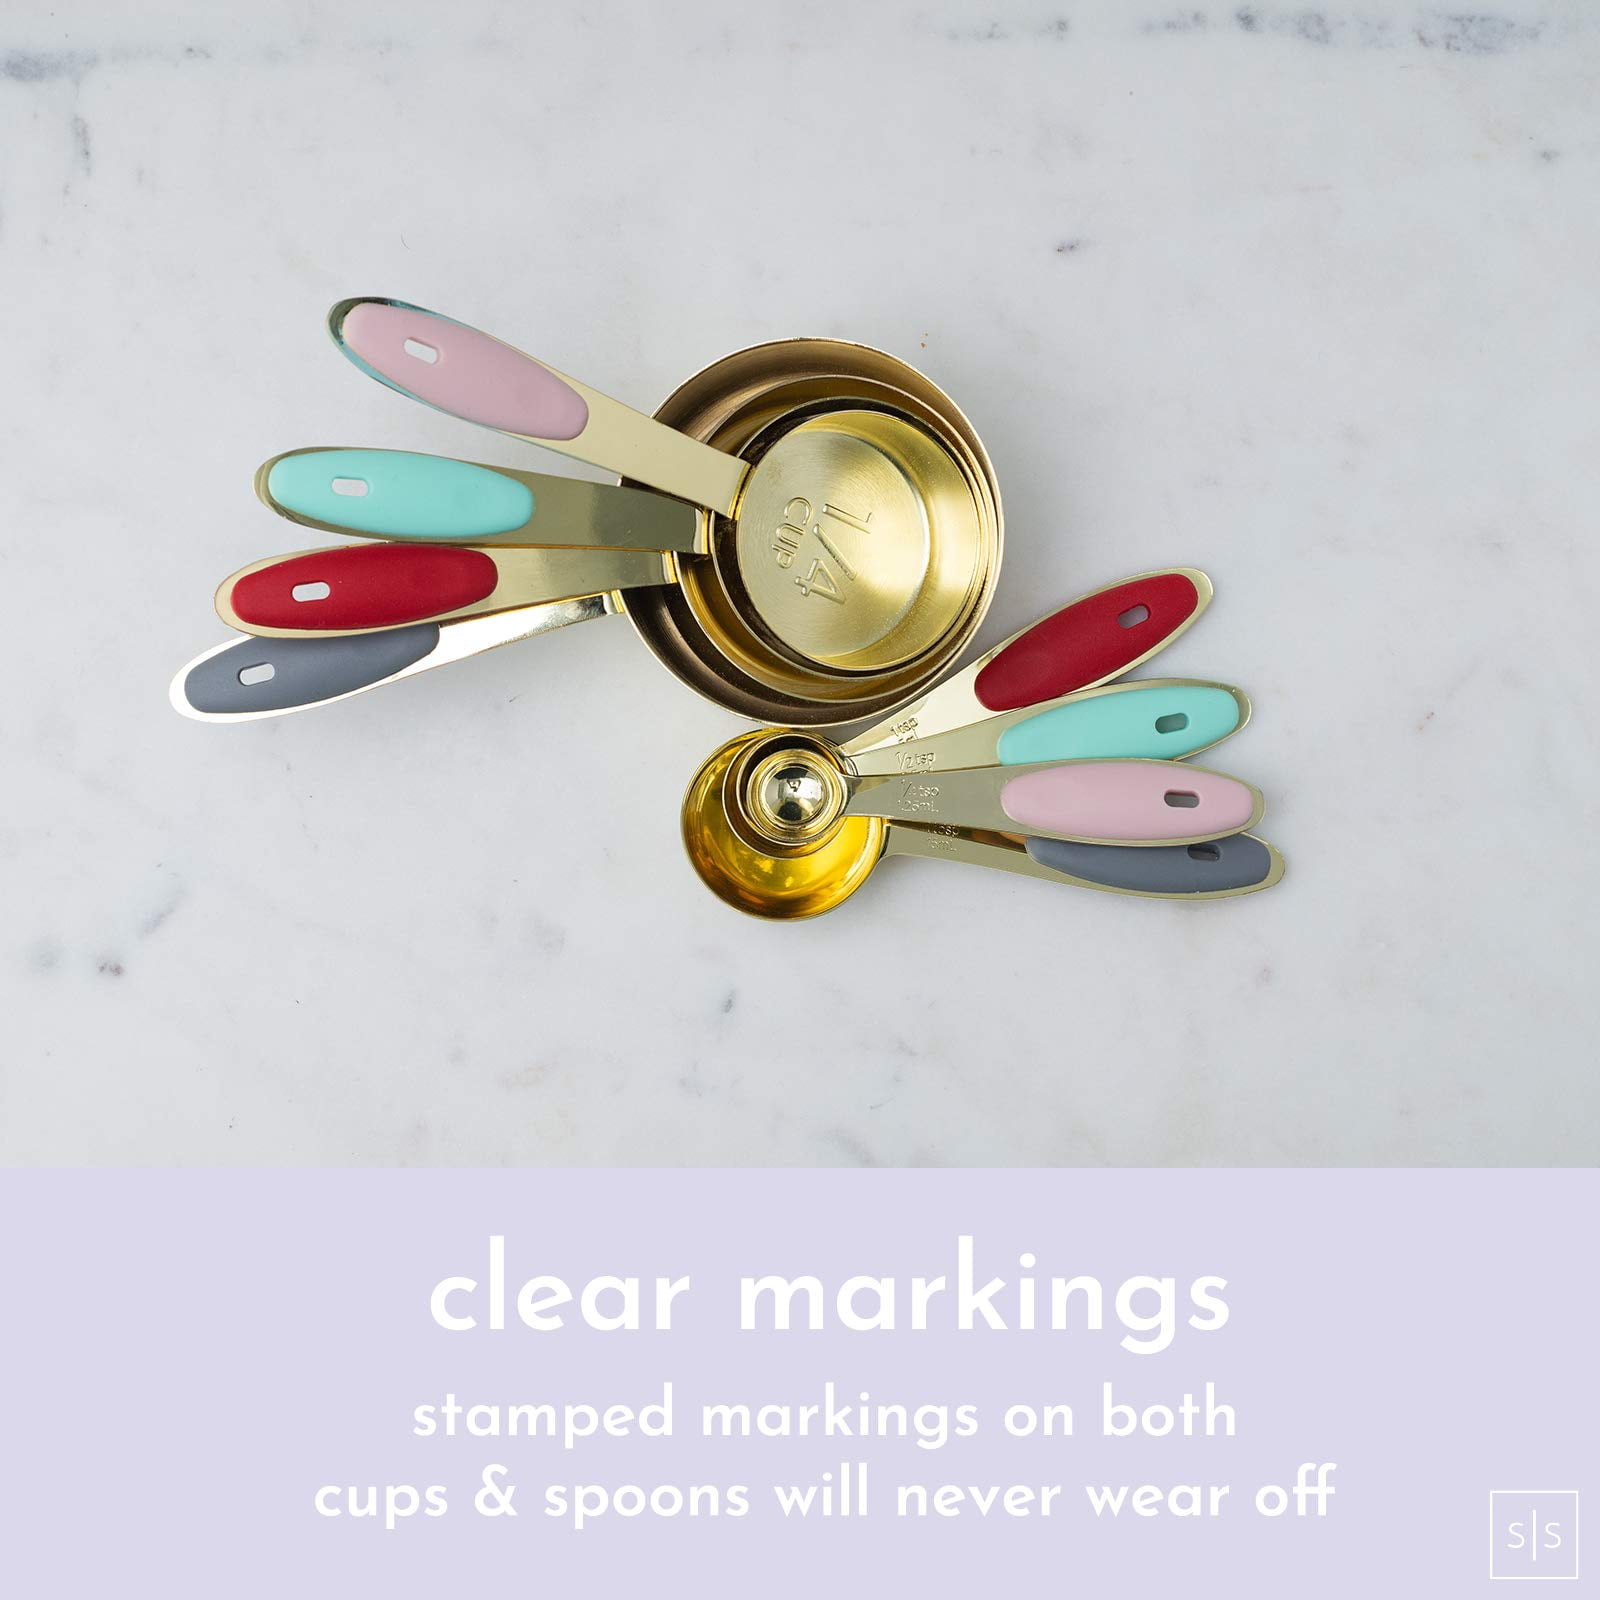 Golden Metal Measuring Cups And Spoons Set - Perfect For Baking